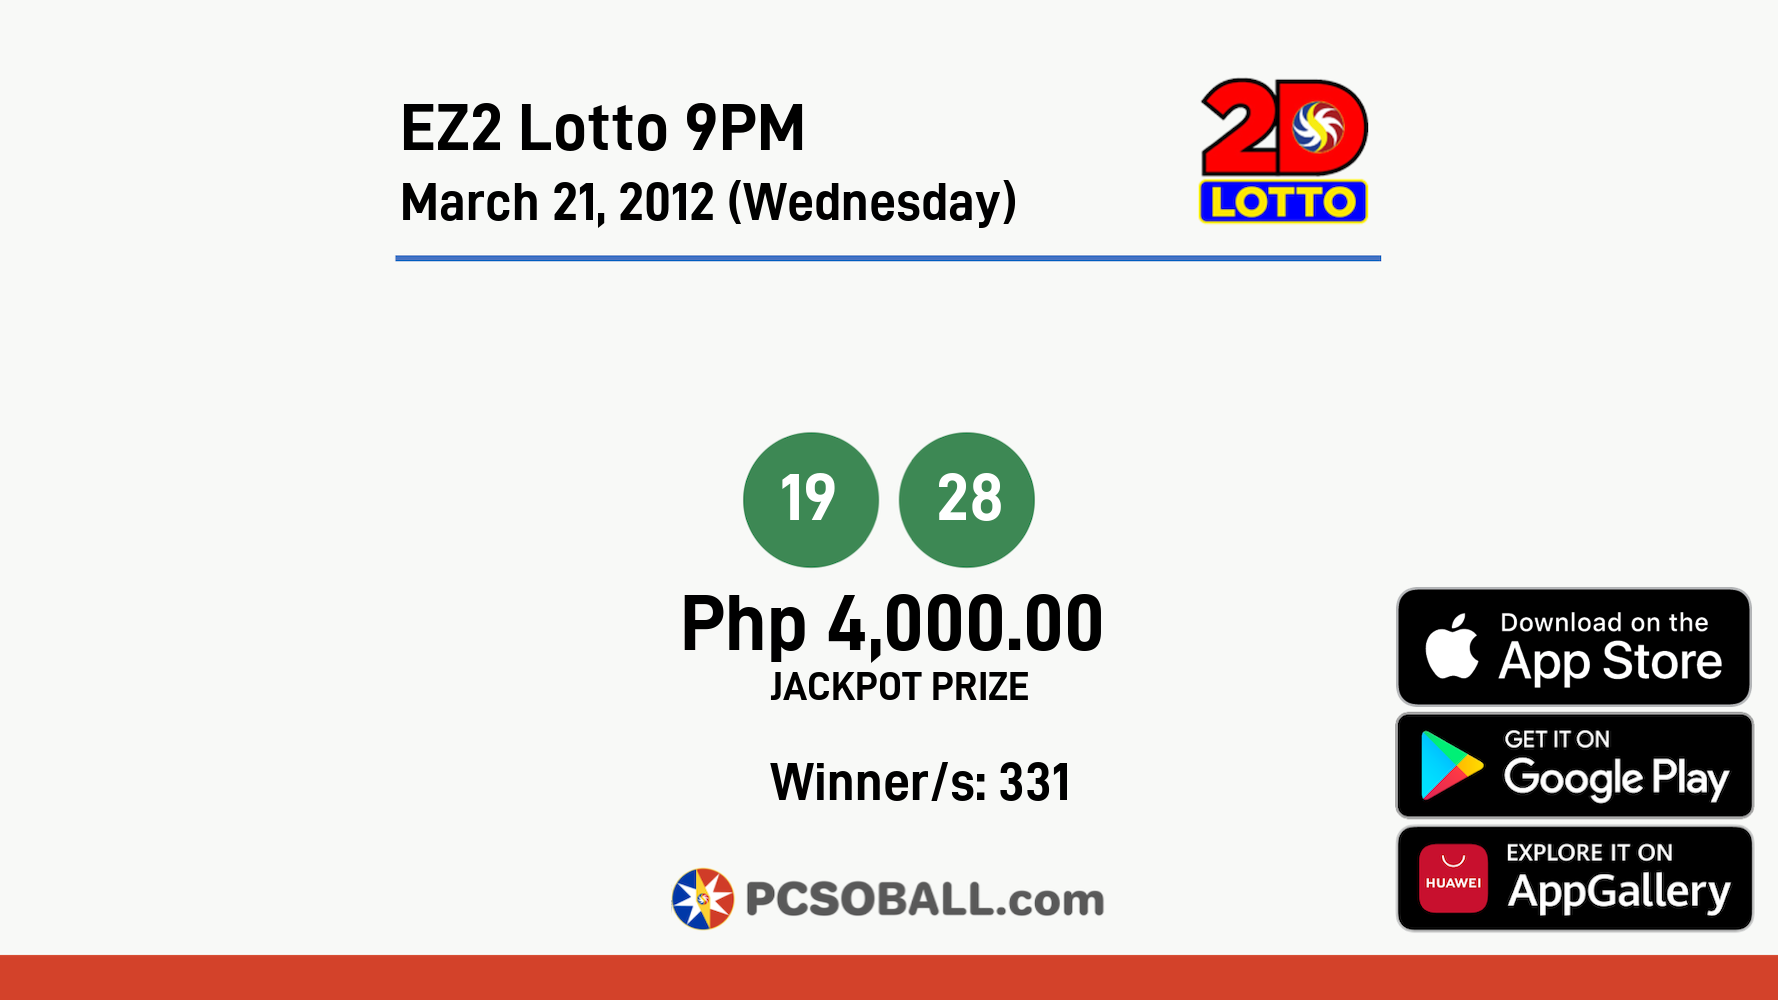 EZ2 Lotto 9PM March 21, 2012 (Wednesday) Result